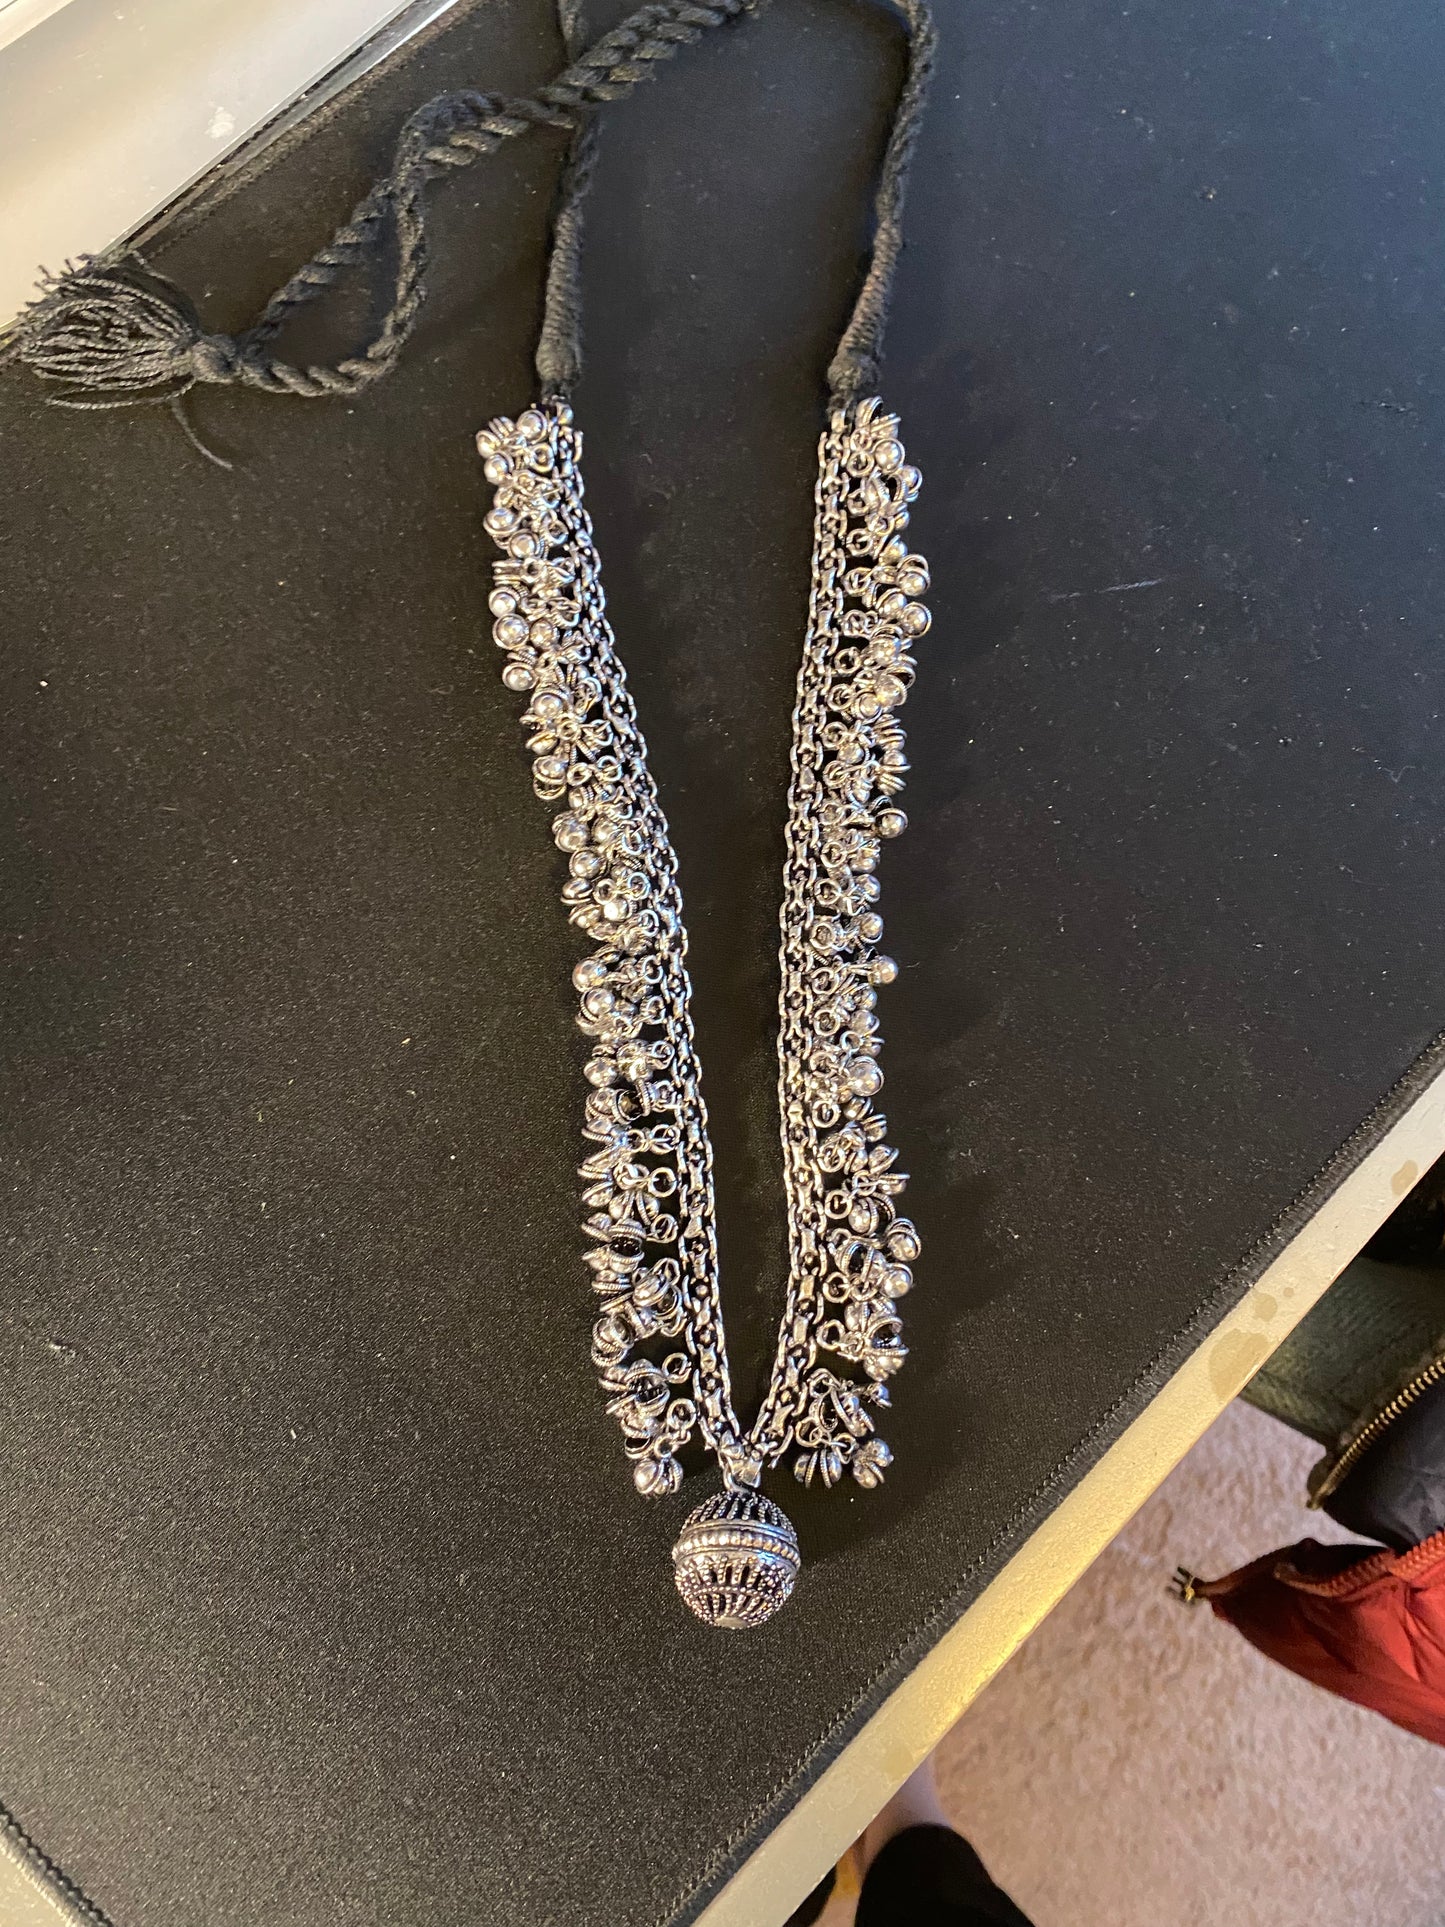 New Jewelry: Silver Jingle Necklace